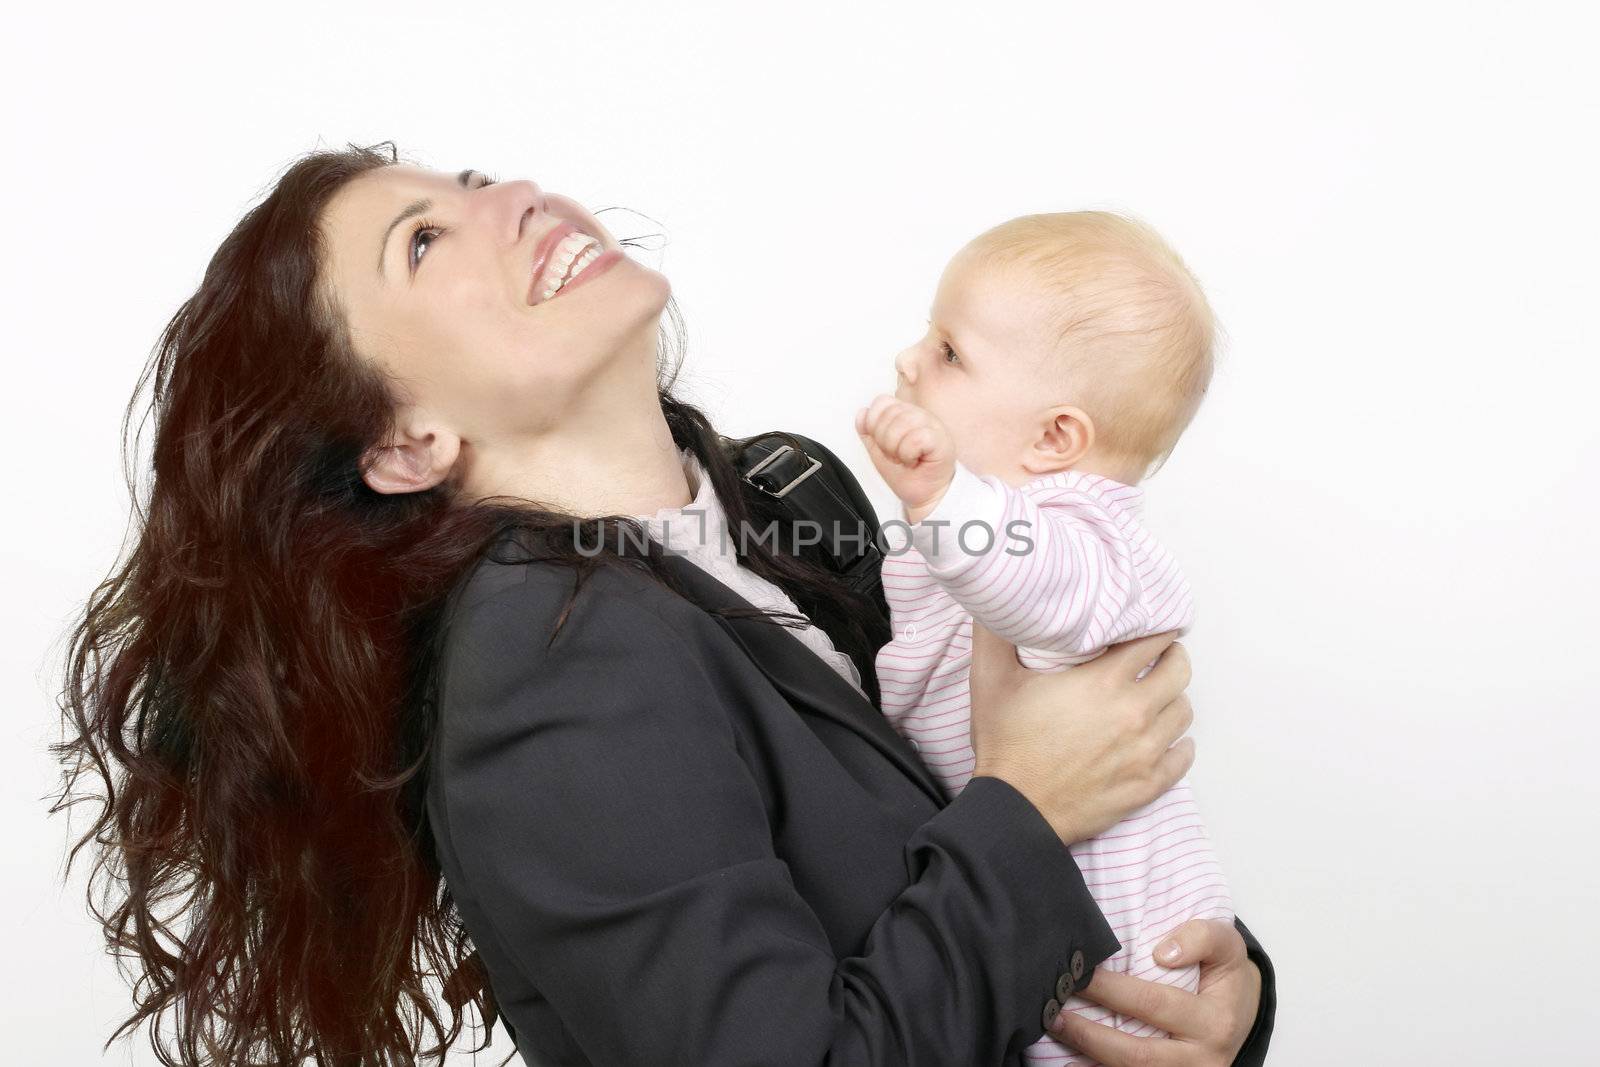 Working mother enjoying time with baby (landscape)